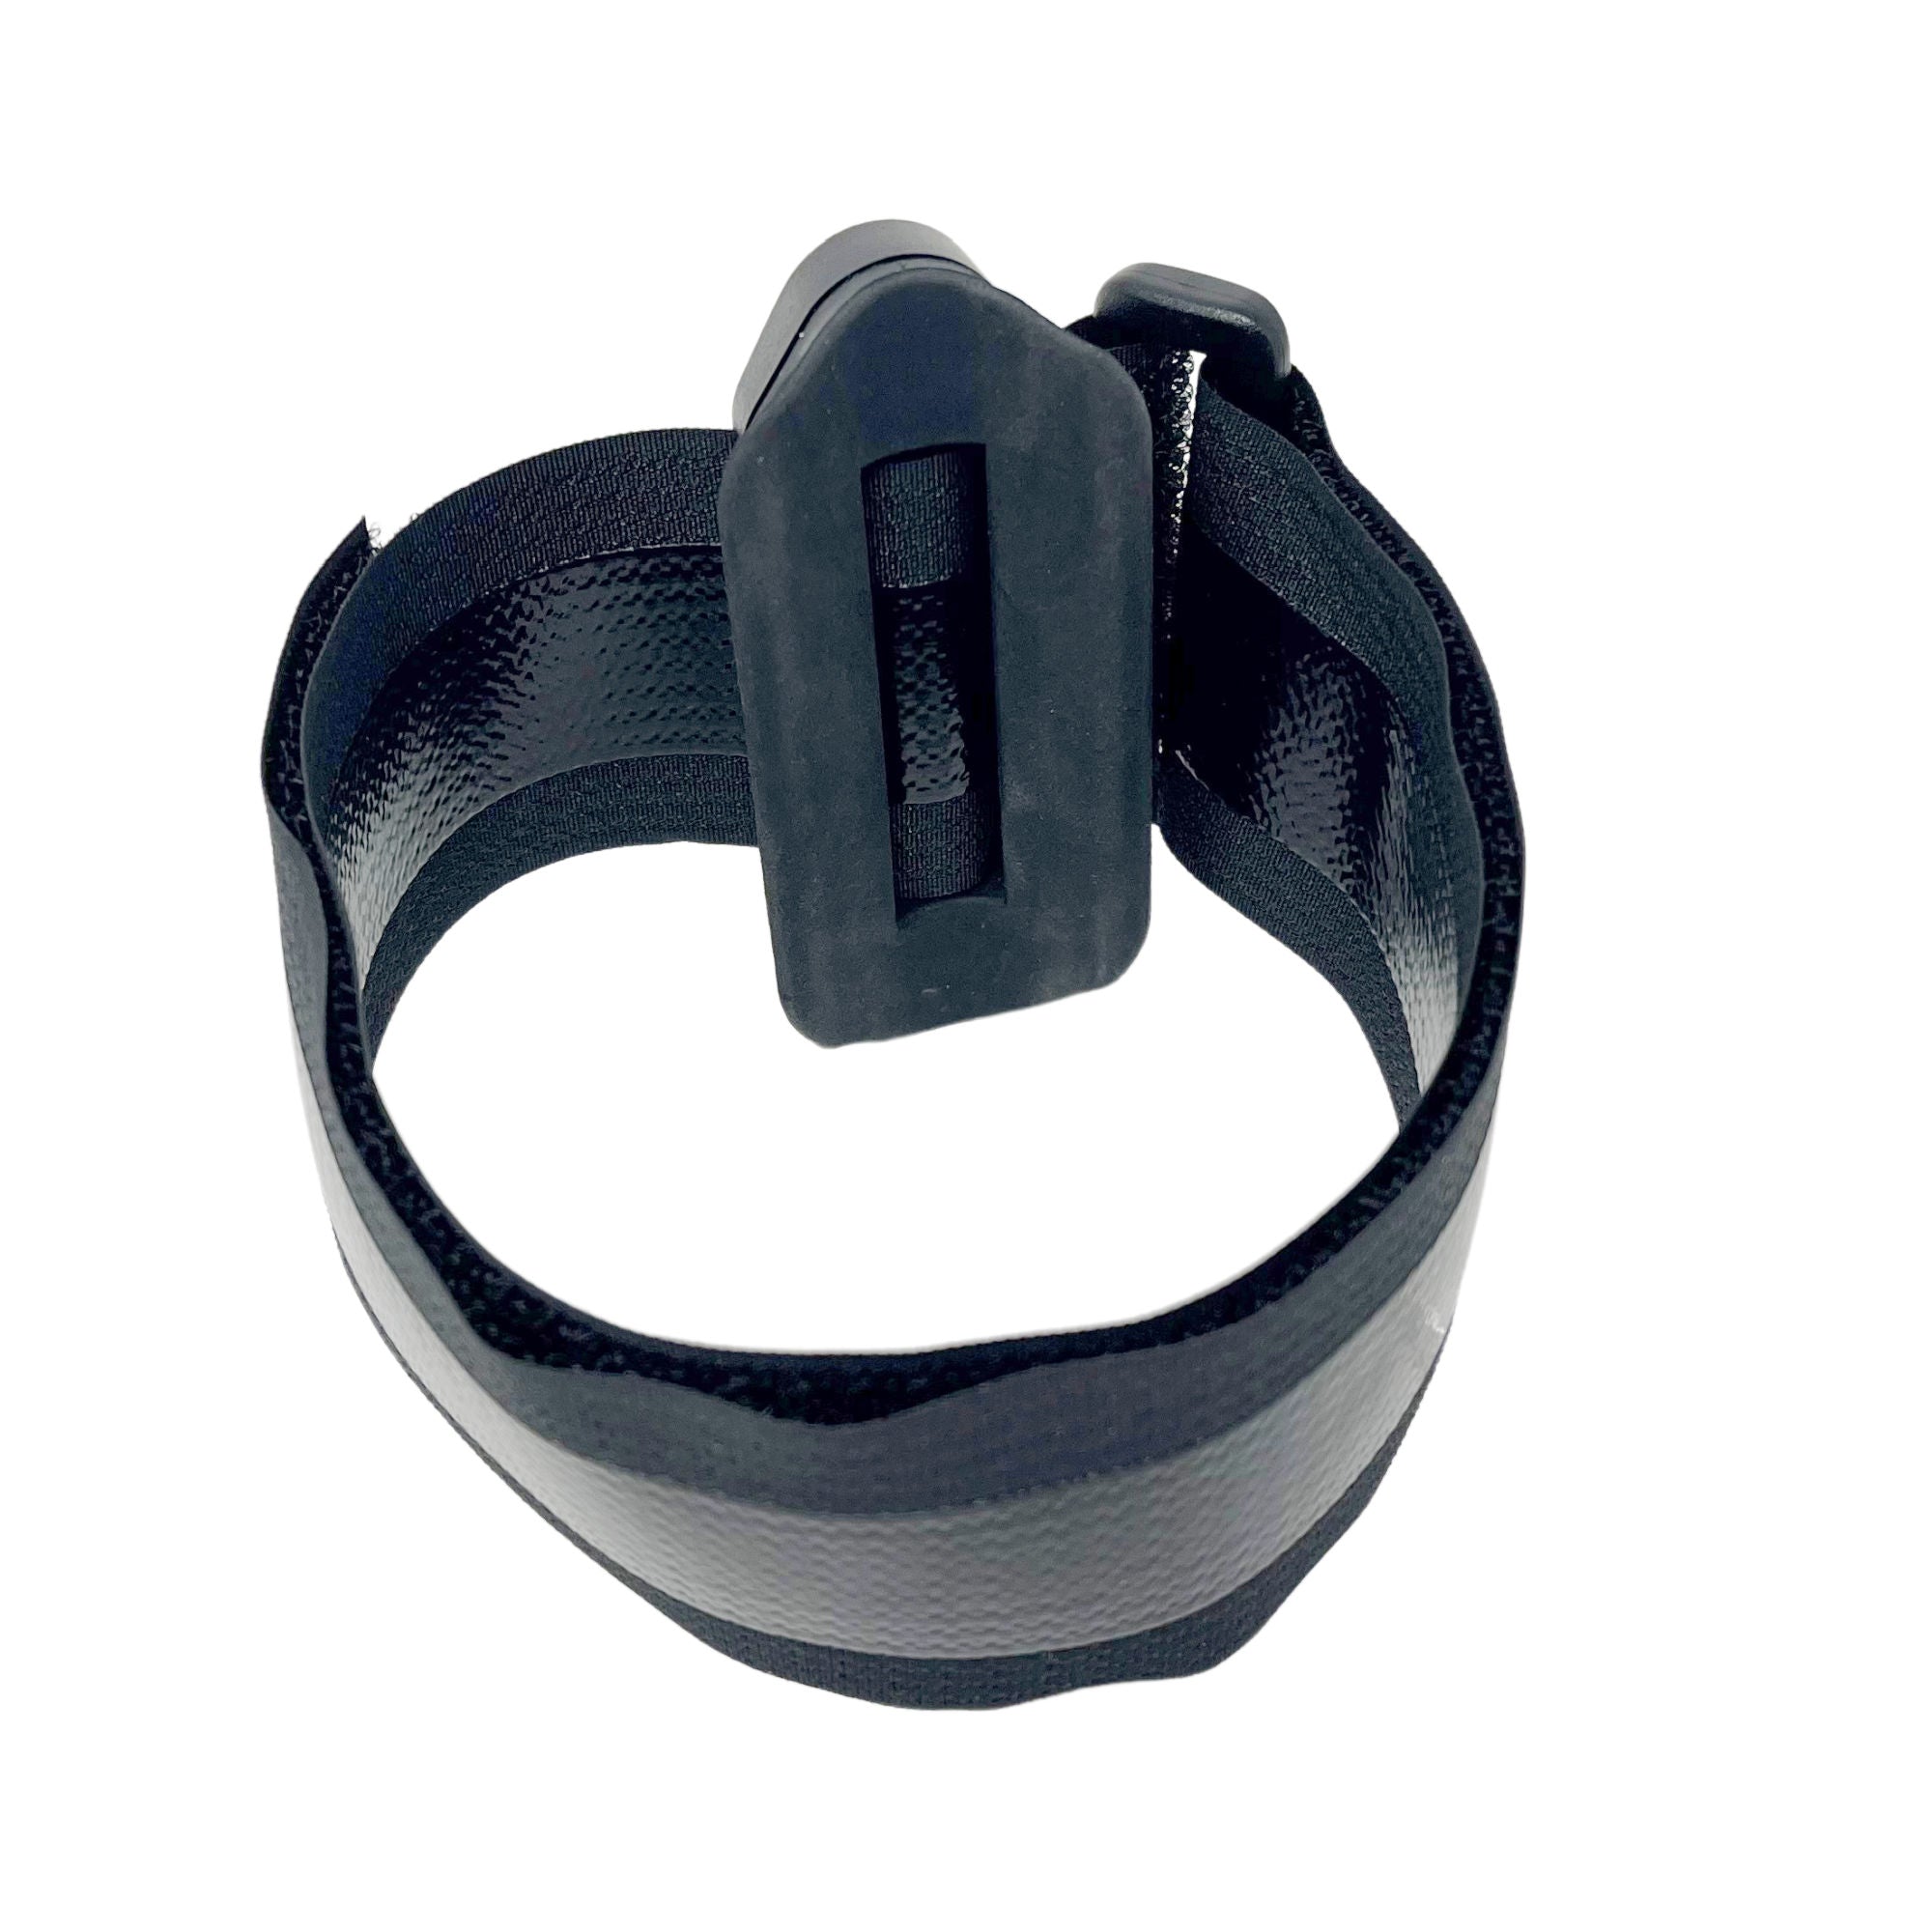 Anywhere Cage Strap Adapter for Large Diameters - EBikes